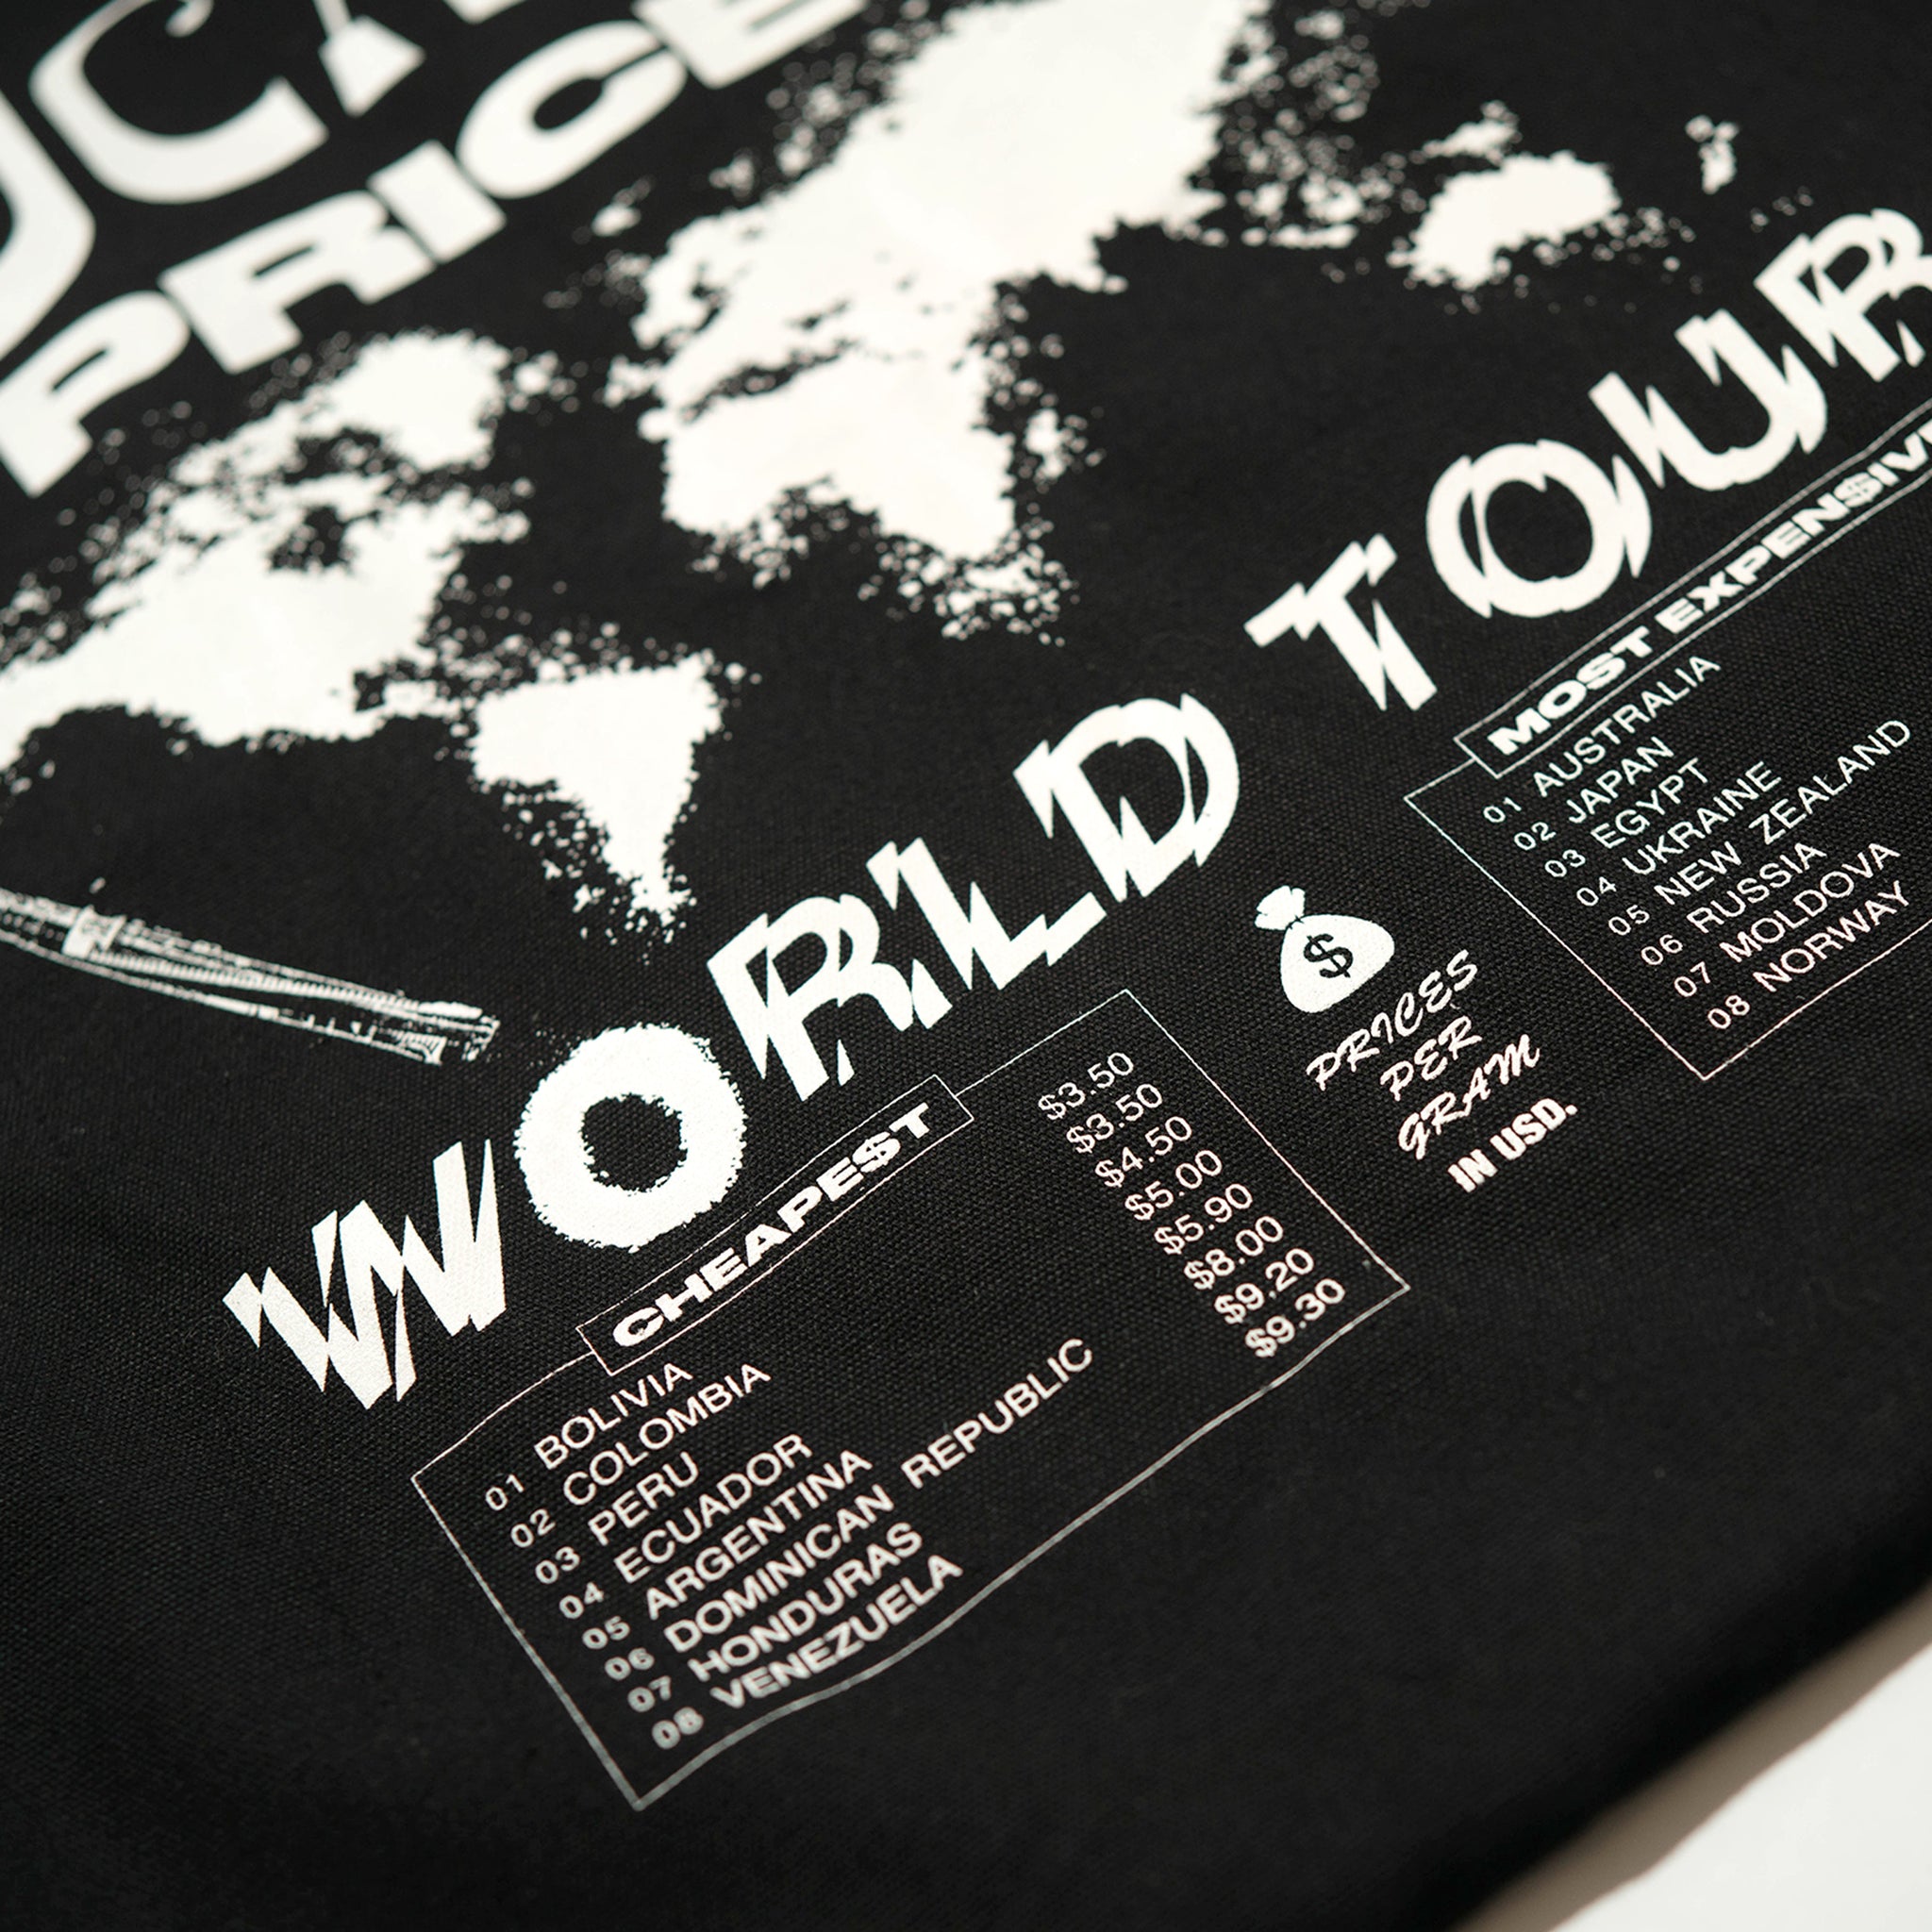 Close-up view of front graphic print of Made in Paradise World Drug Trade Collection "COCAINE PRICES" black tote bag